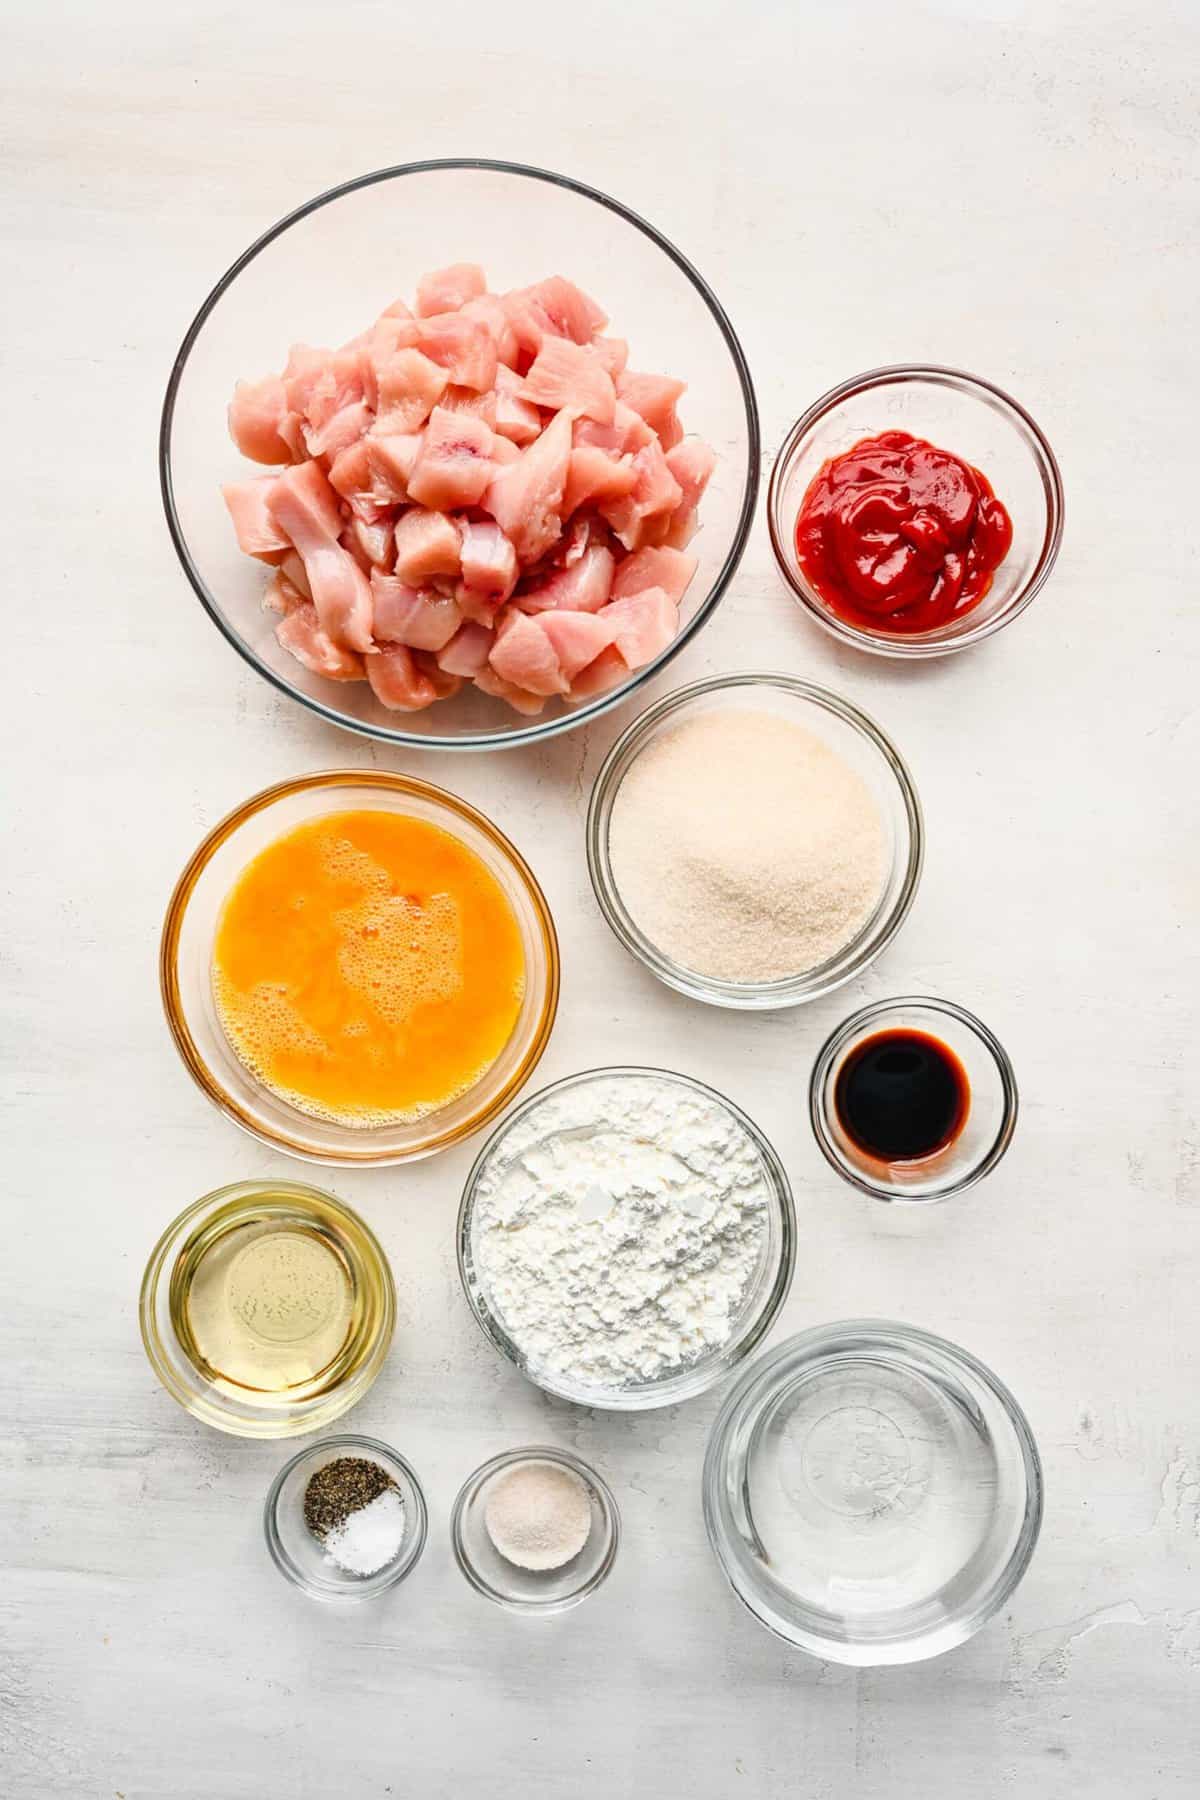 Ingredients for sweet and sour chicken.